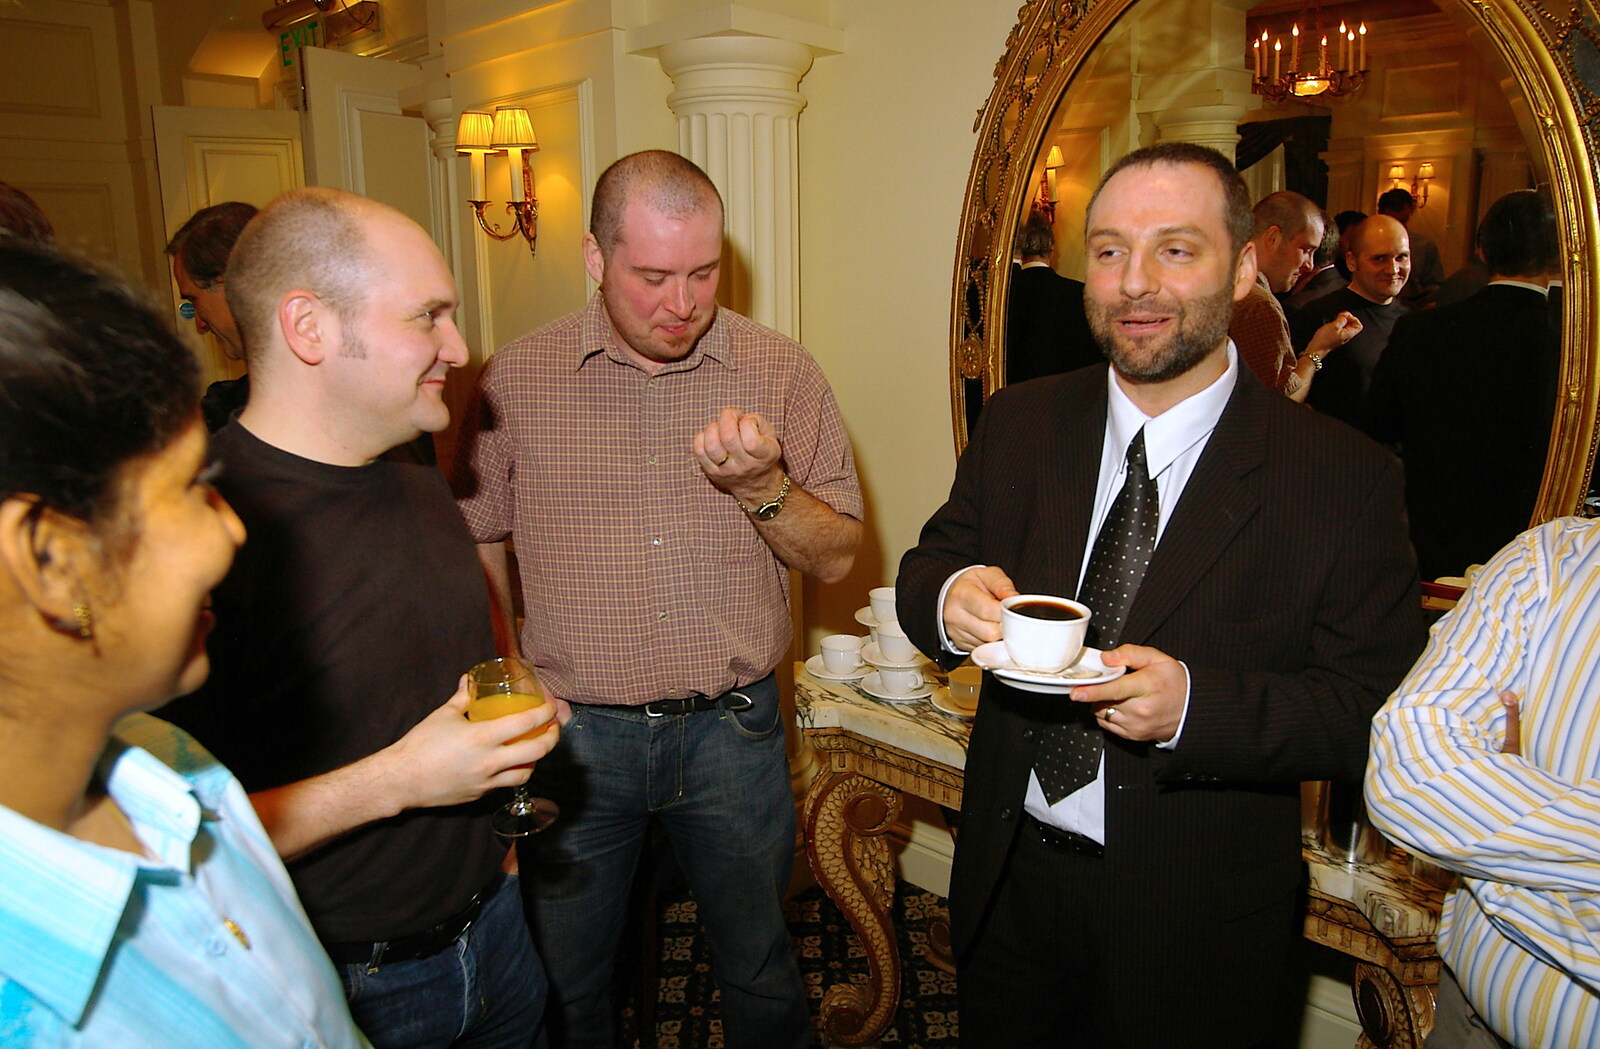 The Cambridge gang from Qualcomm Europe All-Hands at the Berkeley Hotel, London - 9th November 2005